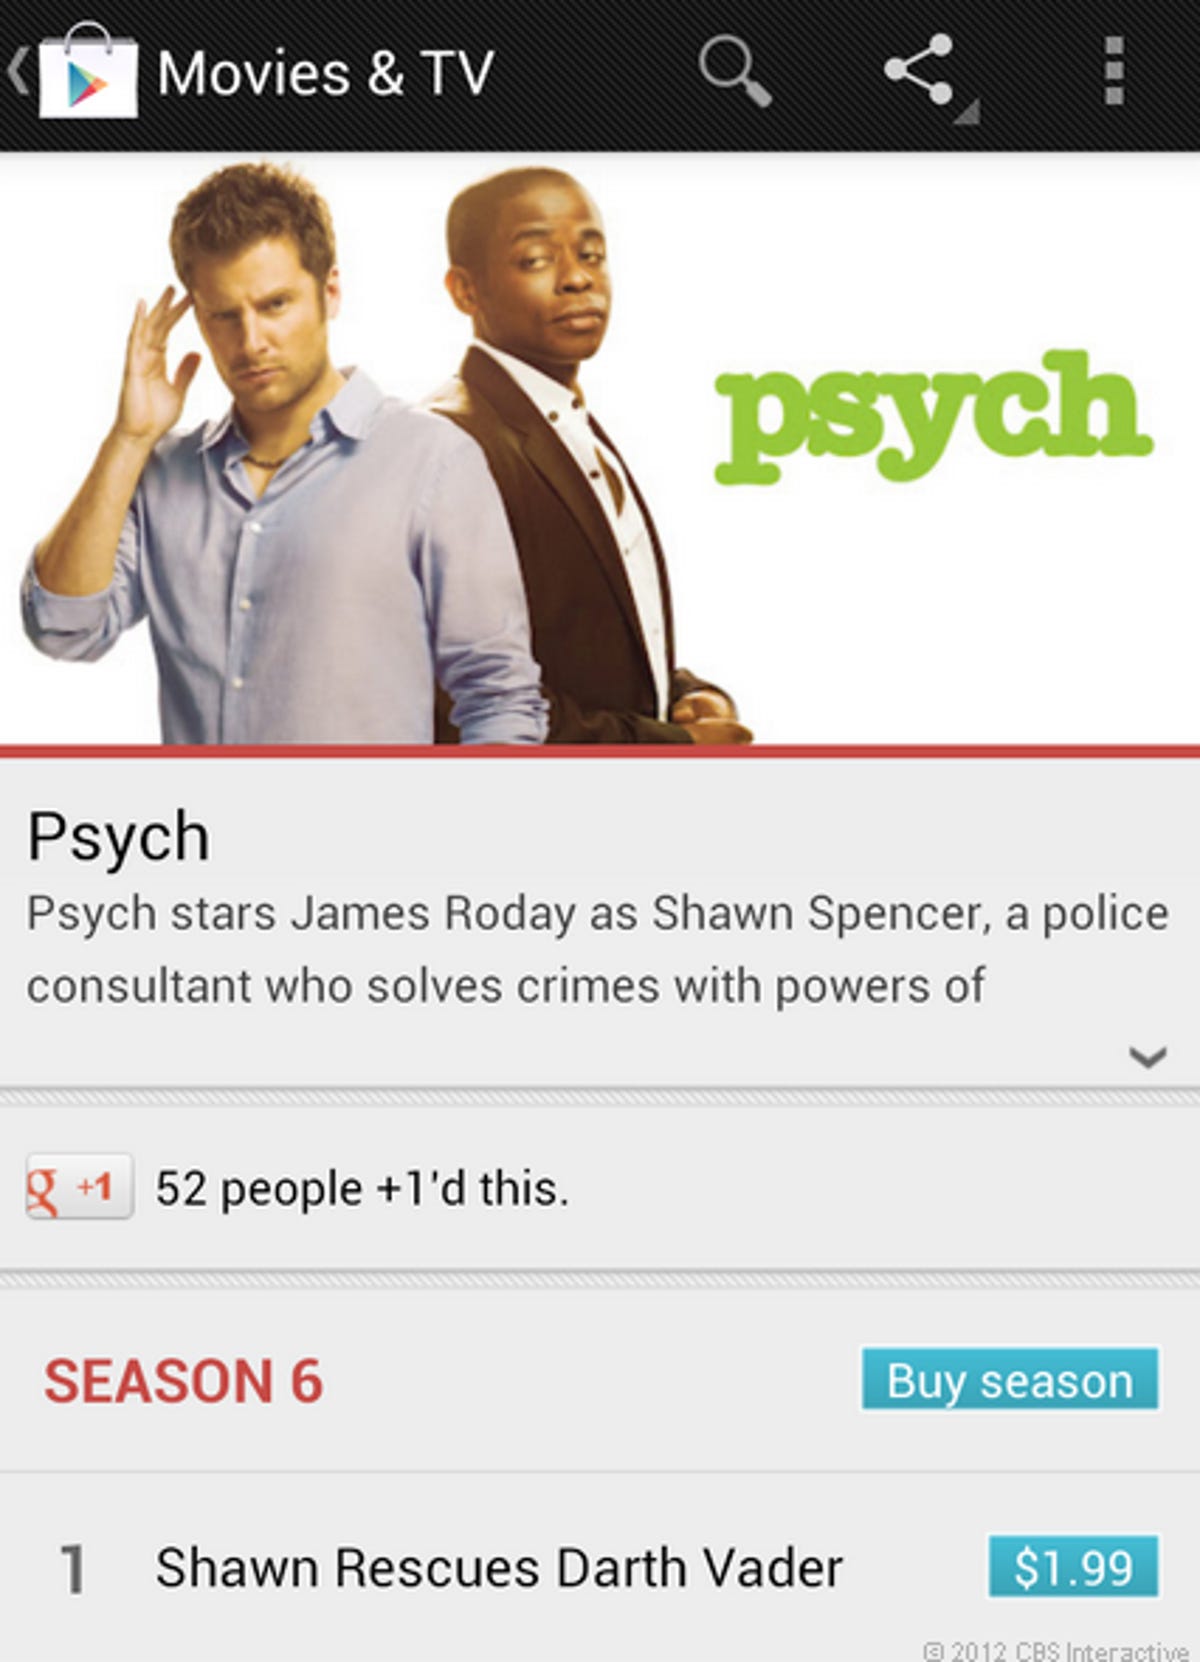 You can now buy TV shows in Google Play.